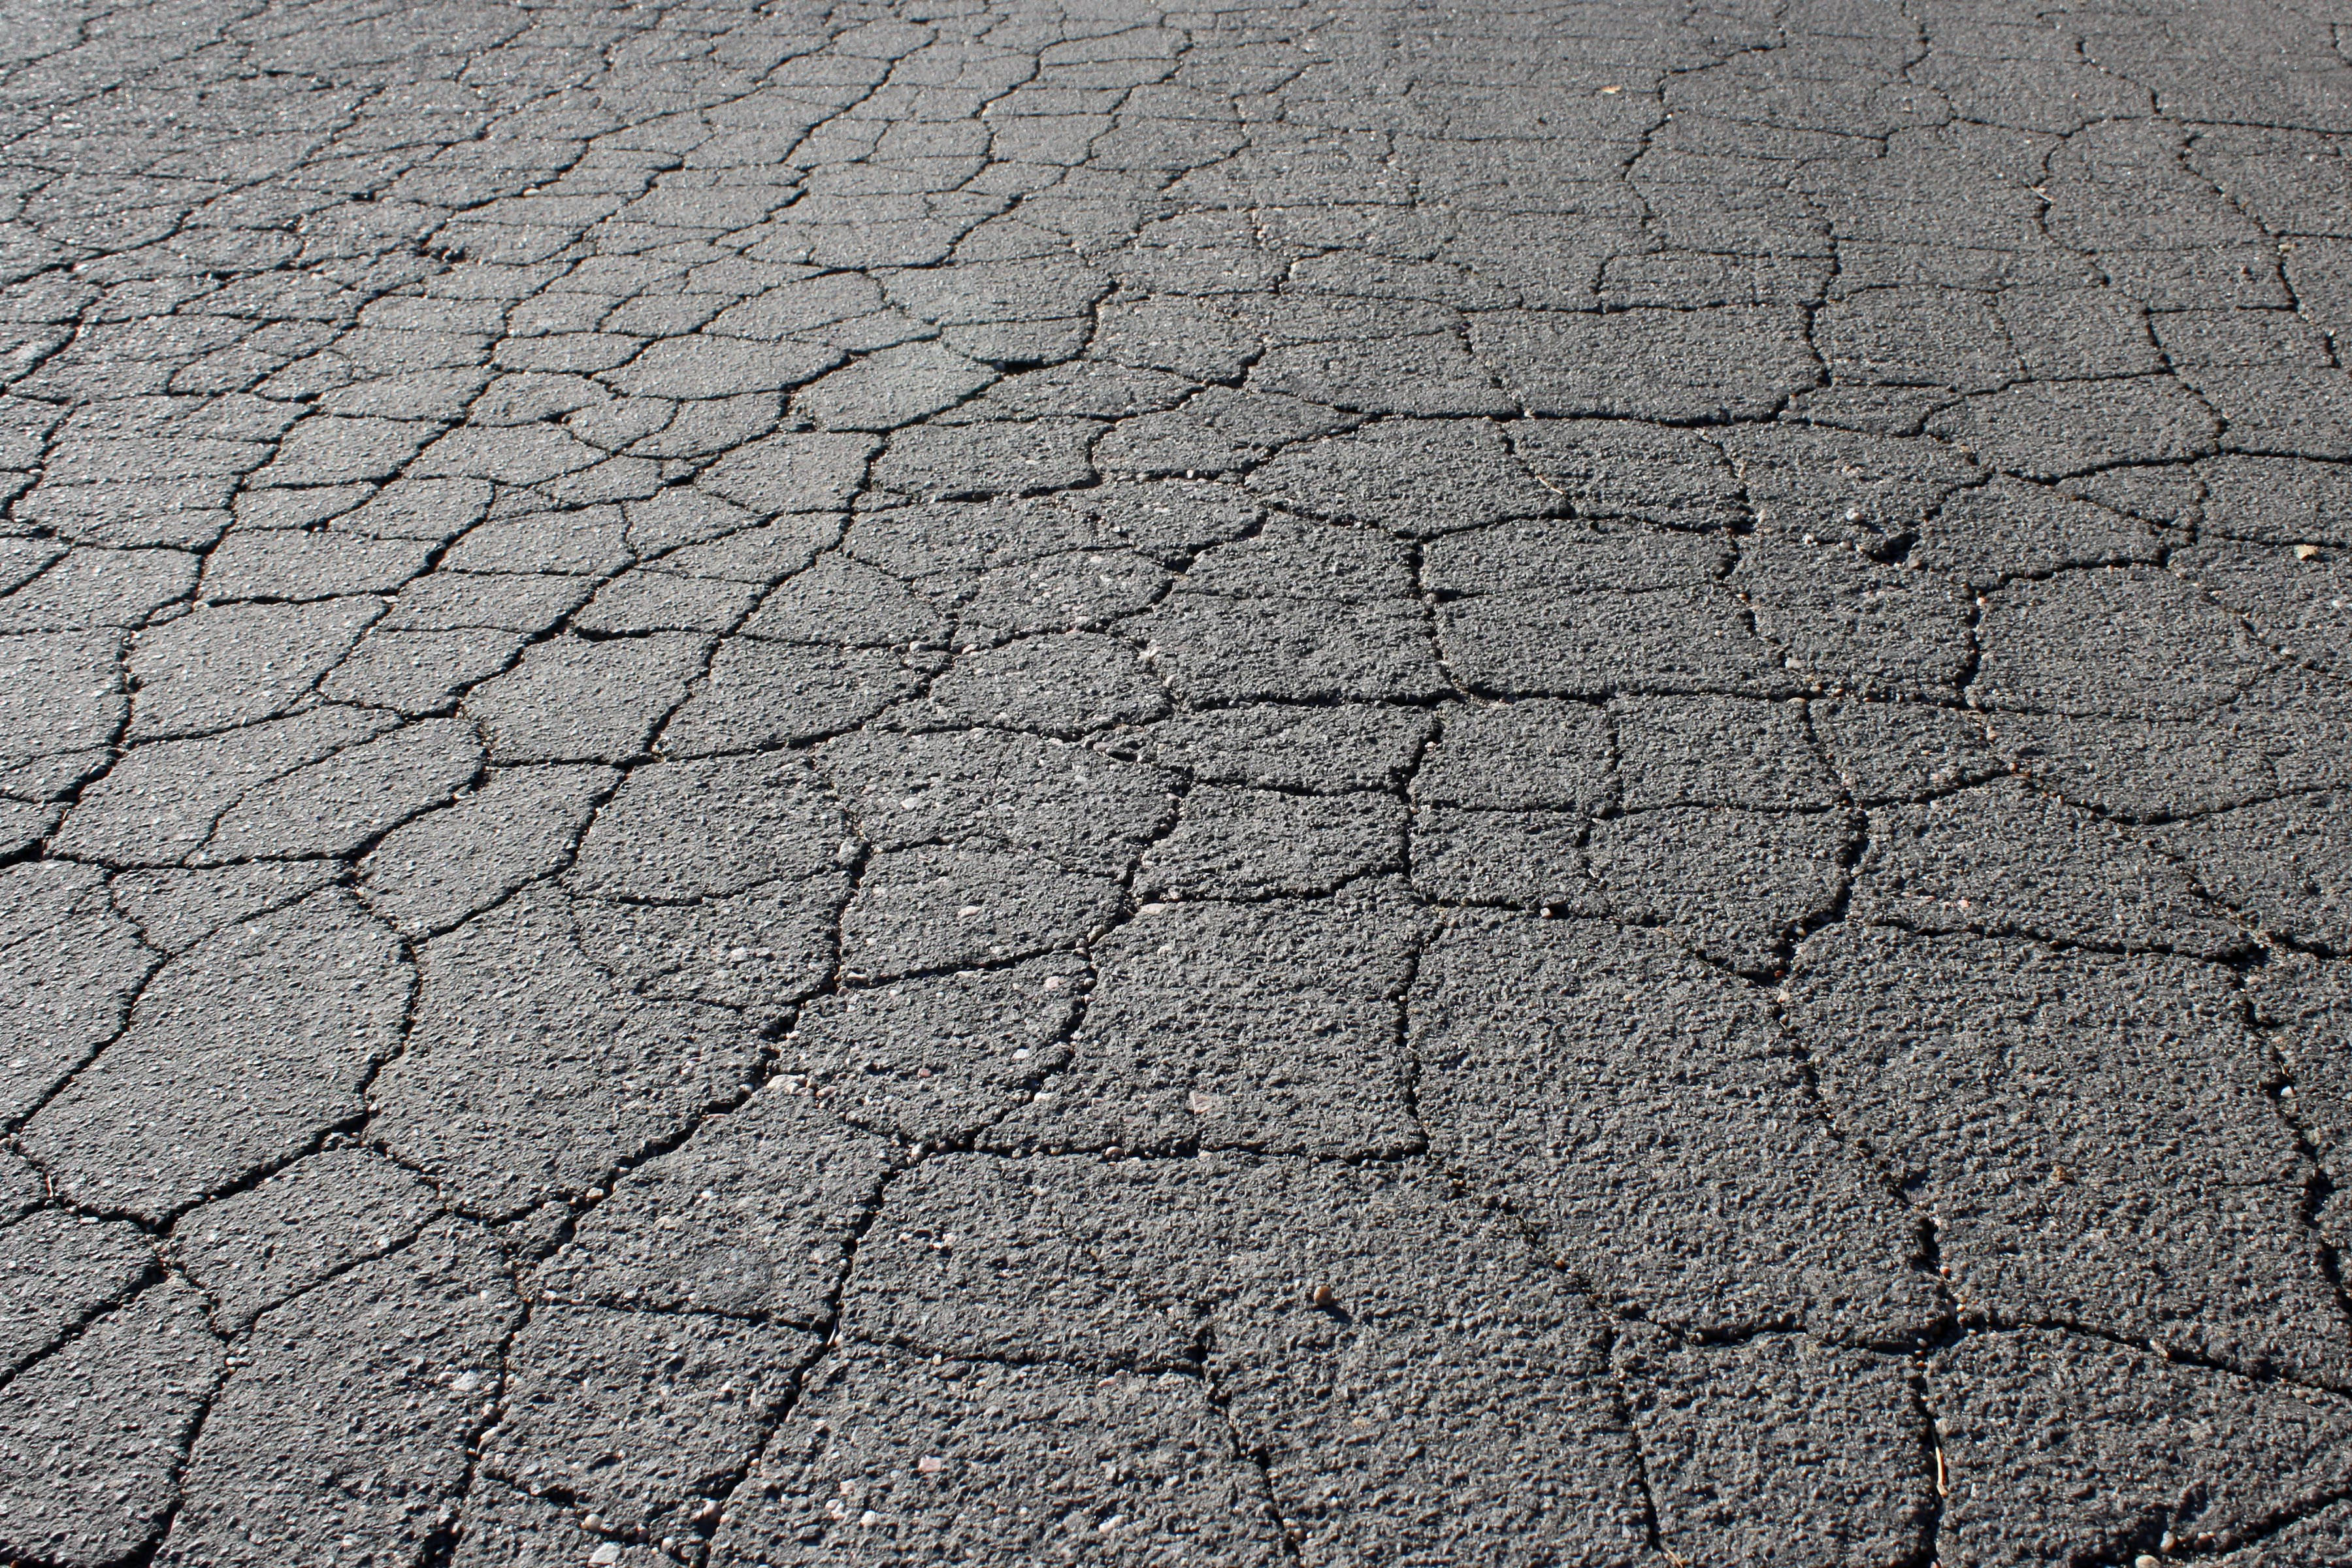 Cracked Concrete Pavement Texture For Free